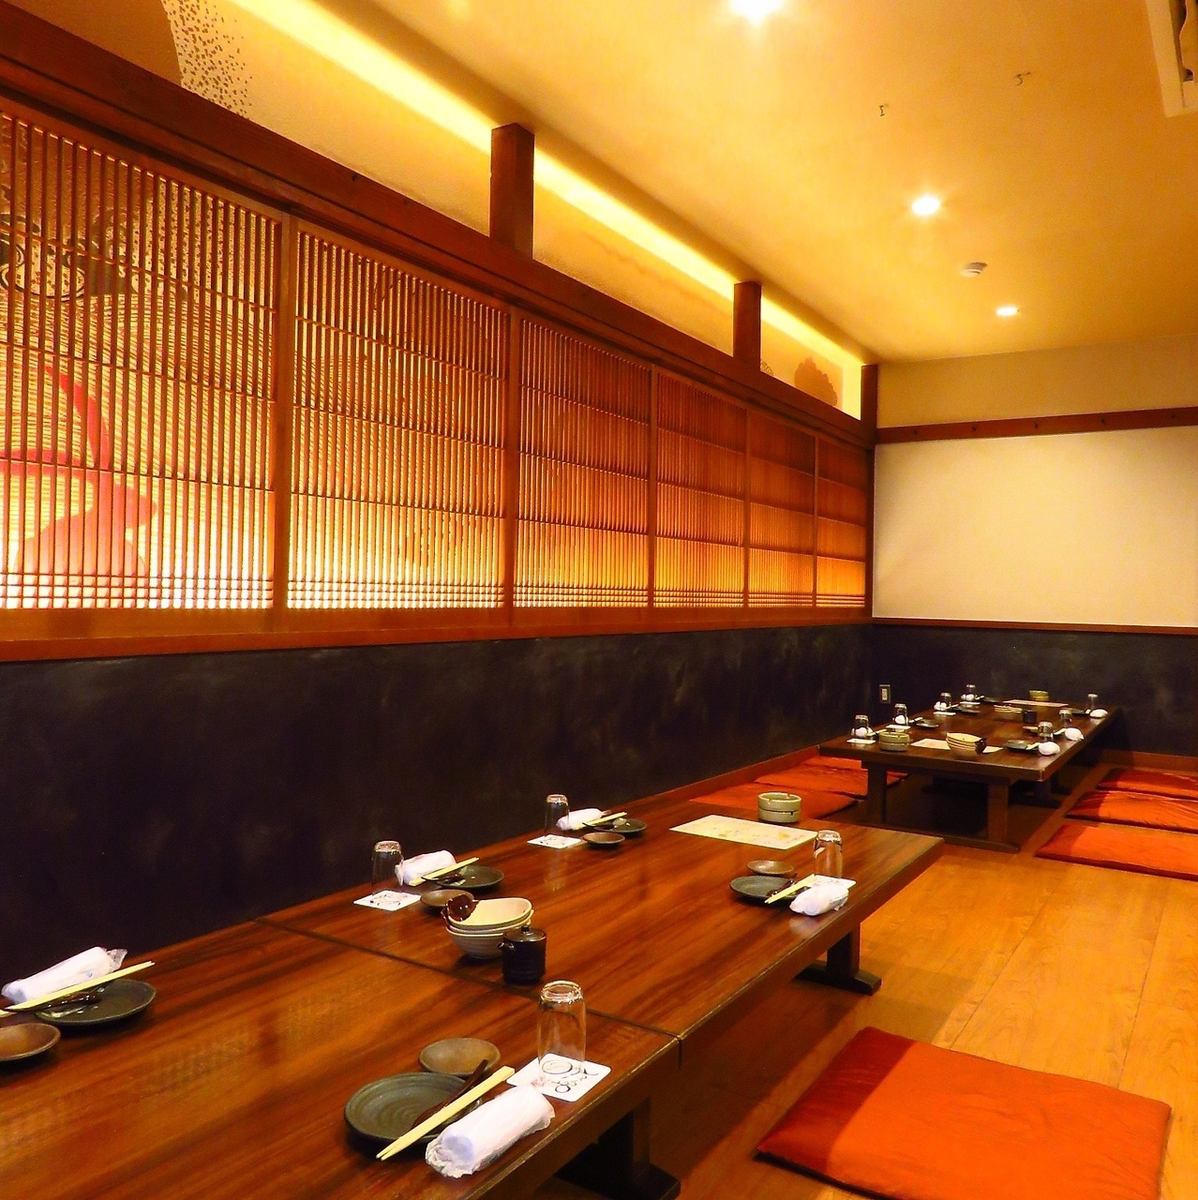 The tatami room on the second floor can accommodate parties of up to 40 people!